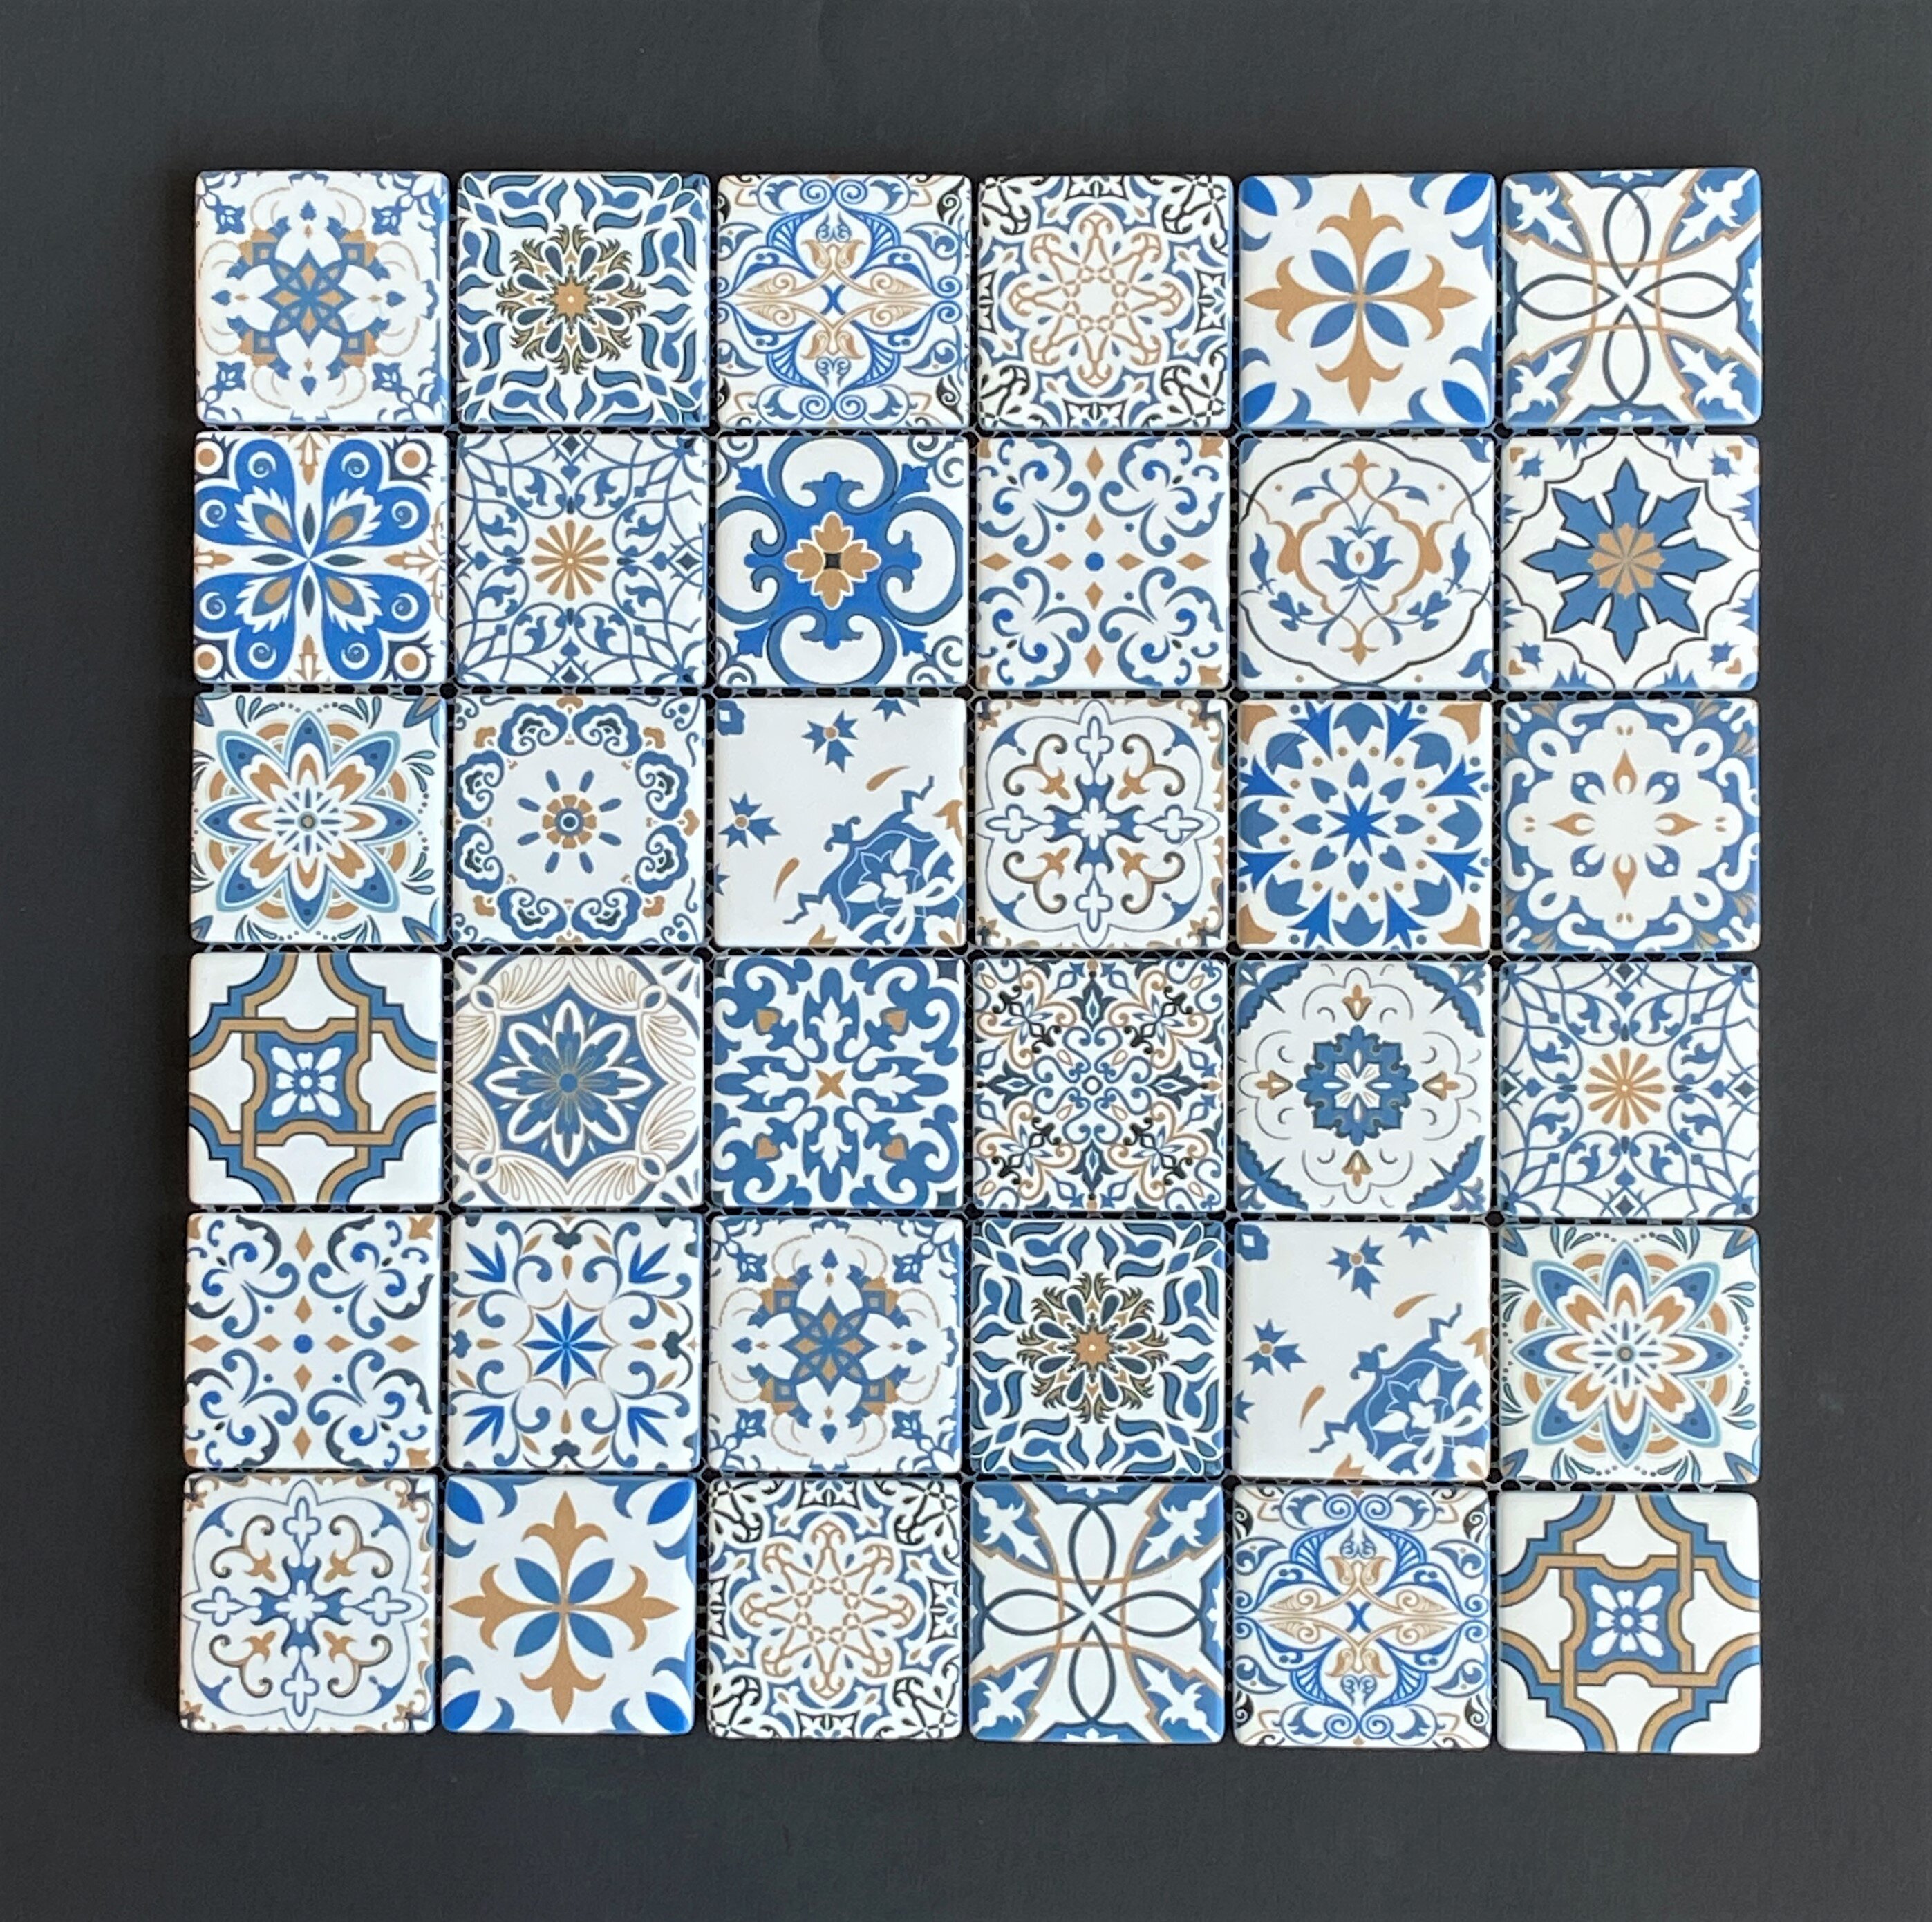 WS Tiles - Crystals Aqua 12 in. x 12 in. Square Glass Mosaic Wall Tile (22  sq. ft / Case)